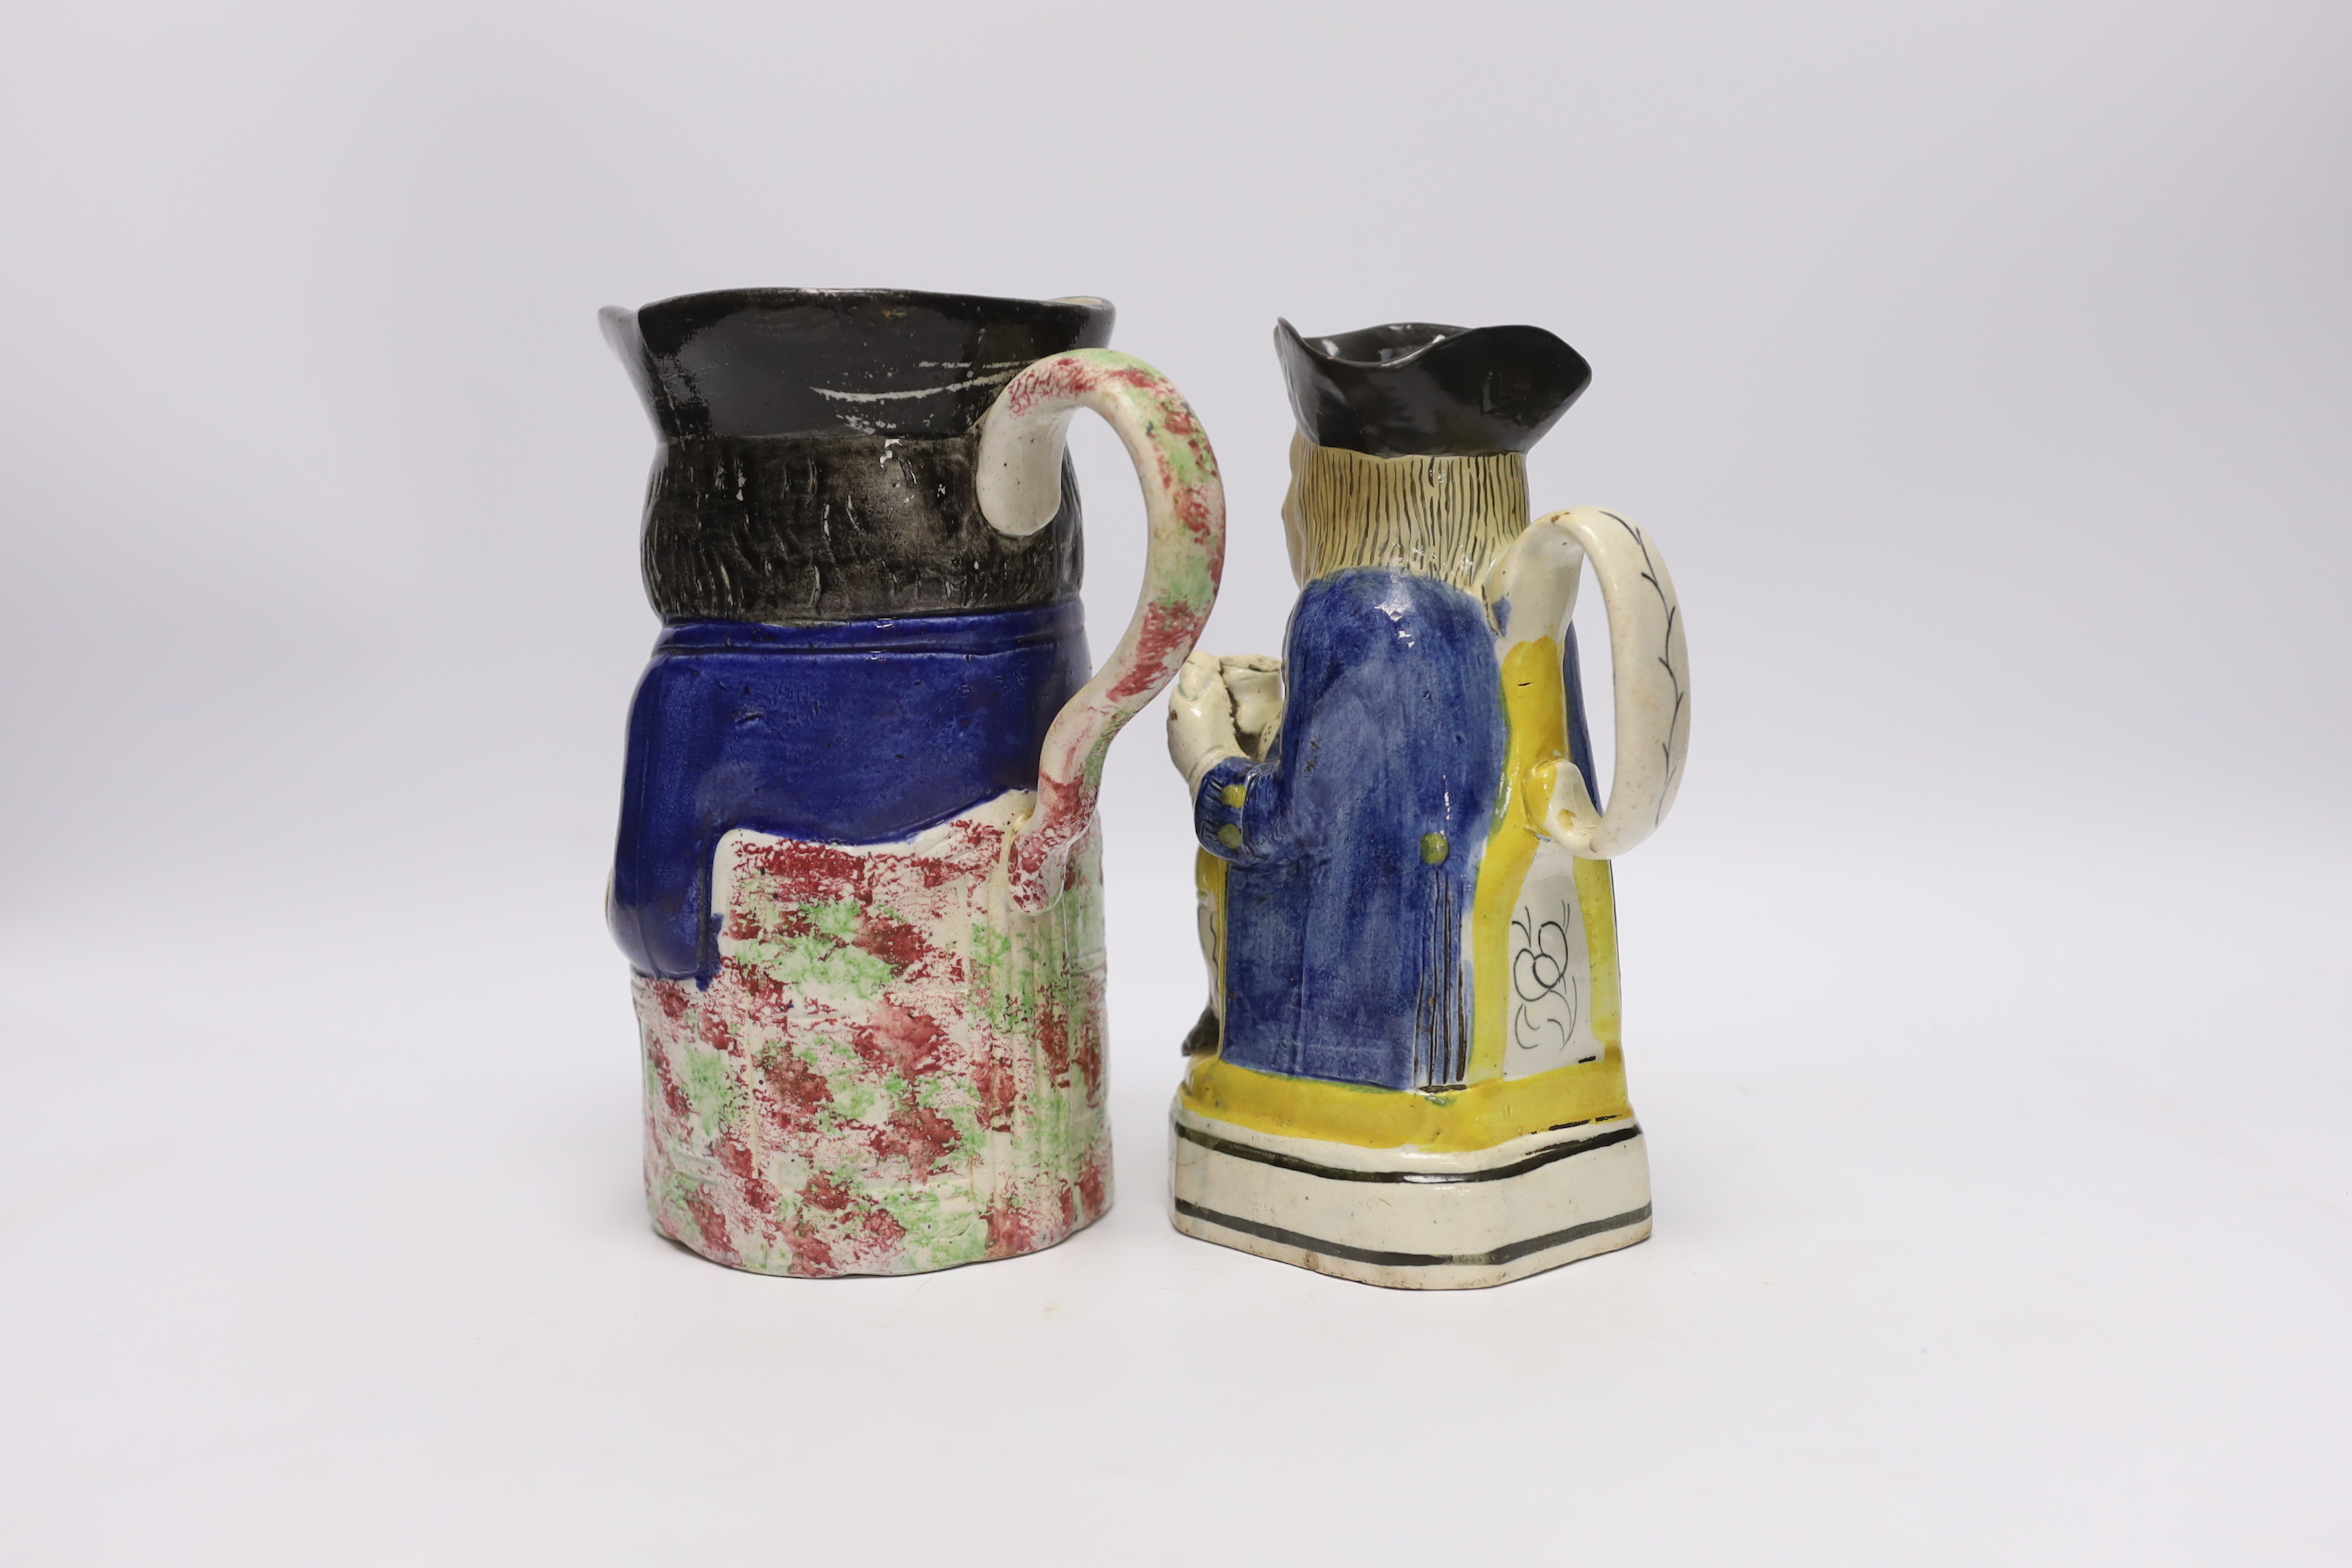 A pearlware Toby jug, c.1795 and late 19th century Staffordshire Toby jug, tallest 19cm